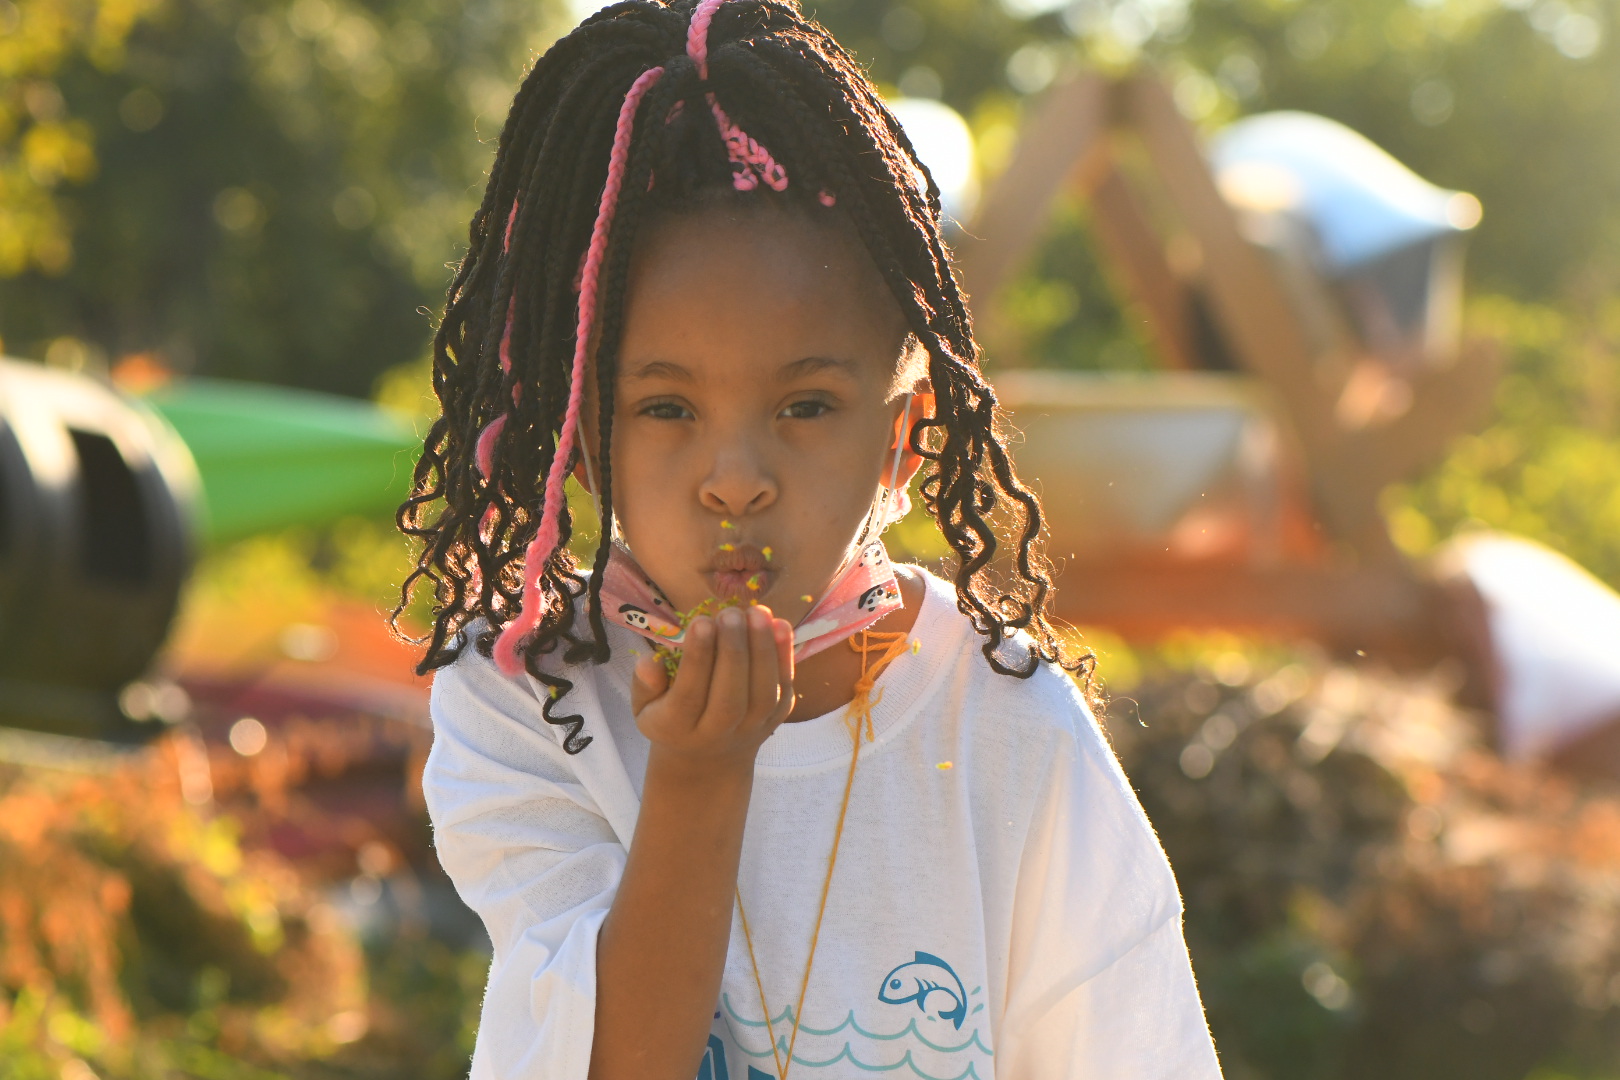 A young girl blows flower petals at the camera